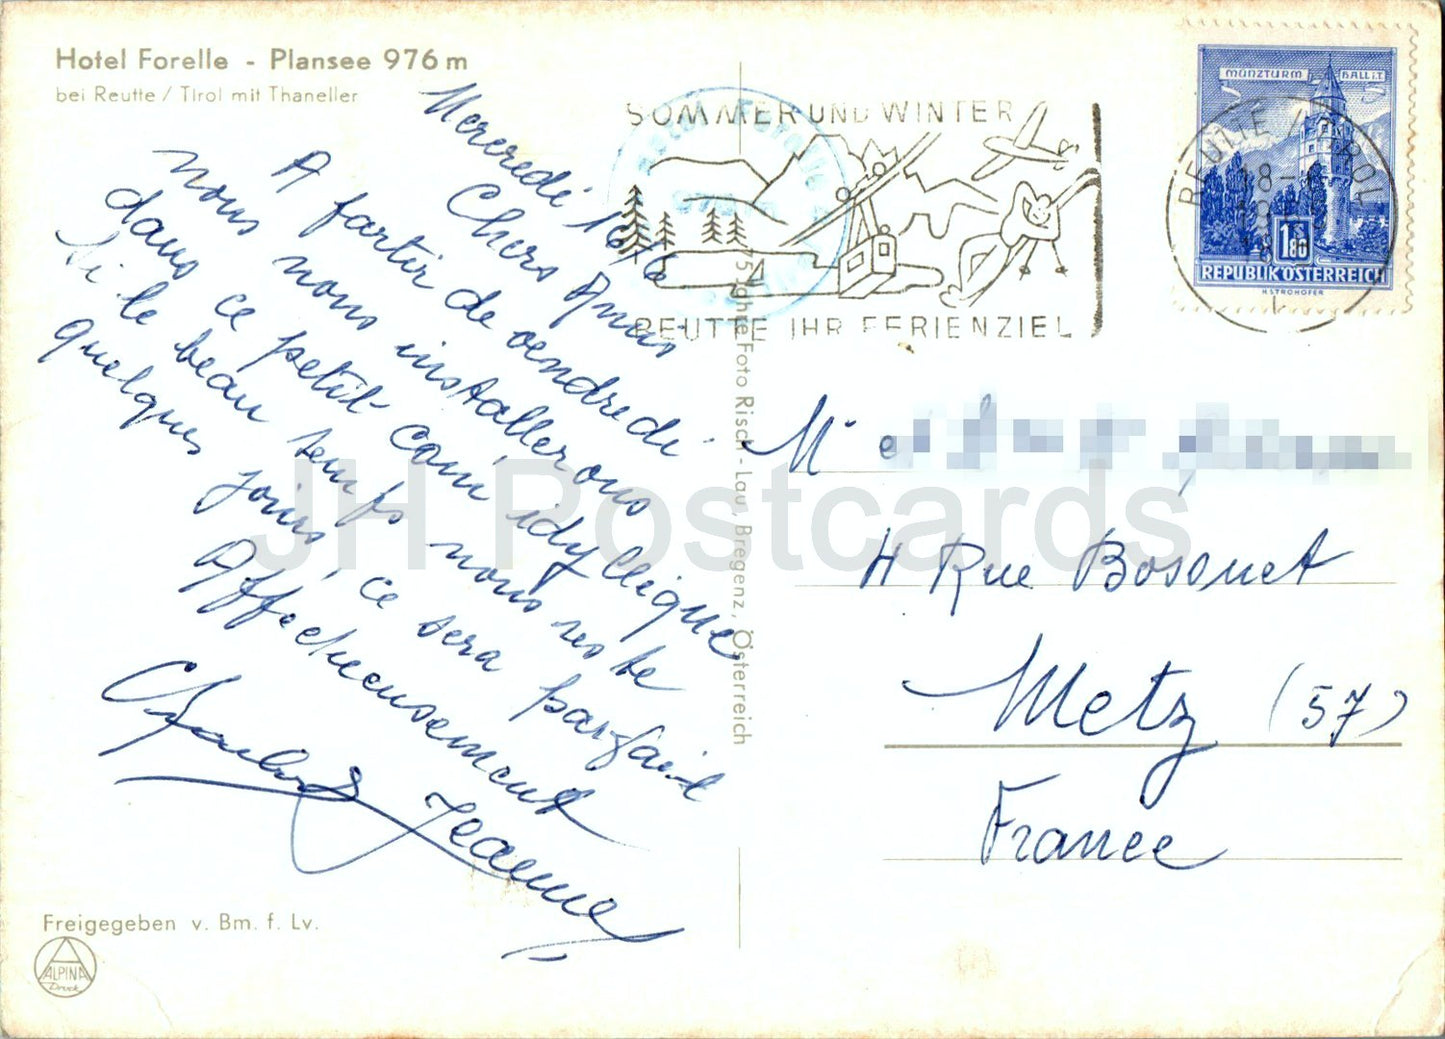 Hotel Forelle - Plansee 976 m bei Reutte - 1968 - Austria - used